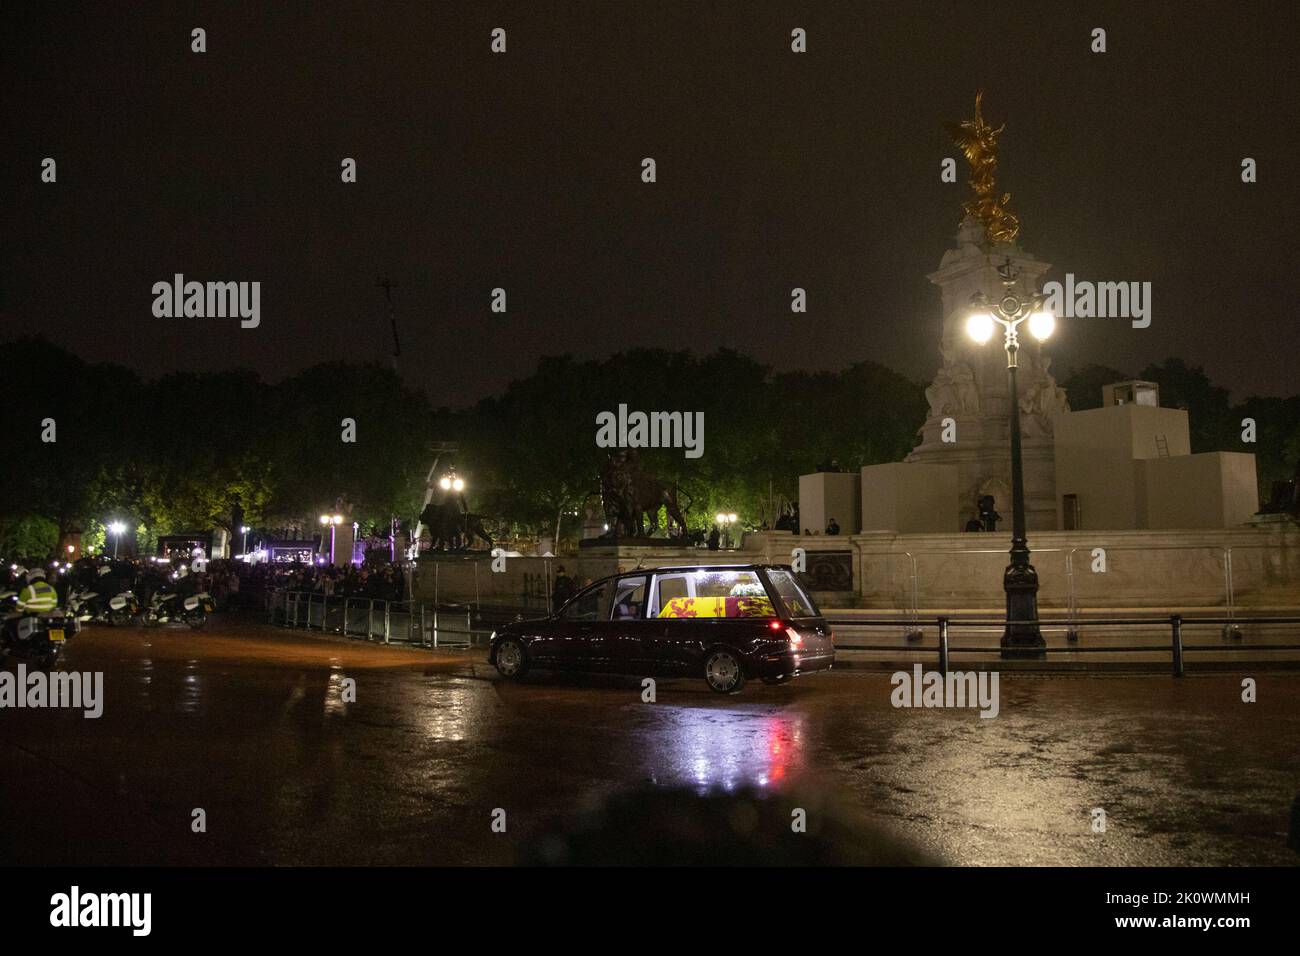 London, England. 13th September, 2022. Mourners have lined the street in front of Buckingham Palace to pay their respects as the Queen makes her last journey to Buckingham Palace. Credit: Kiki Streitberger / Alamy Live News Stock Photo